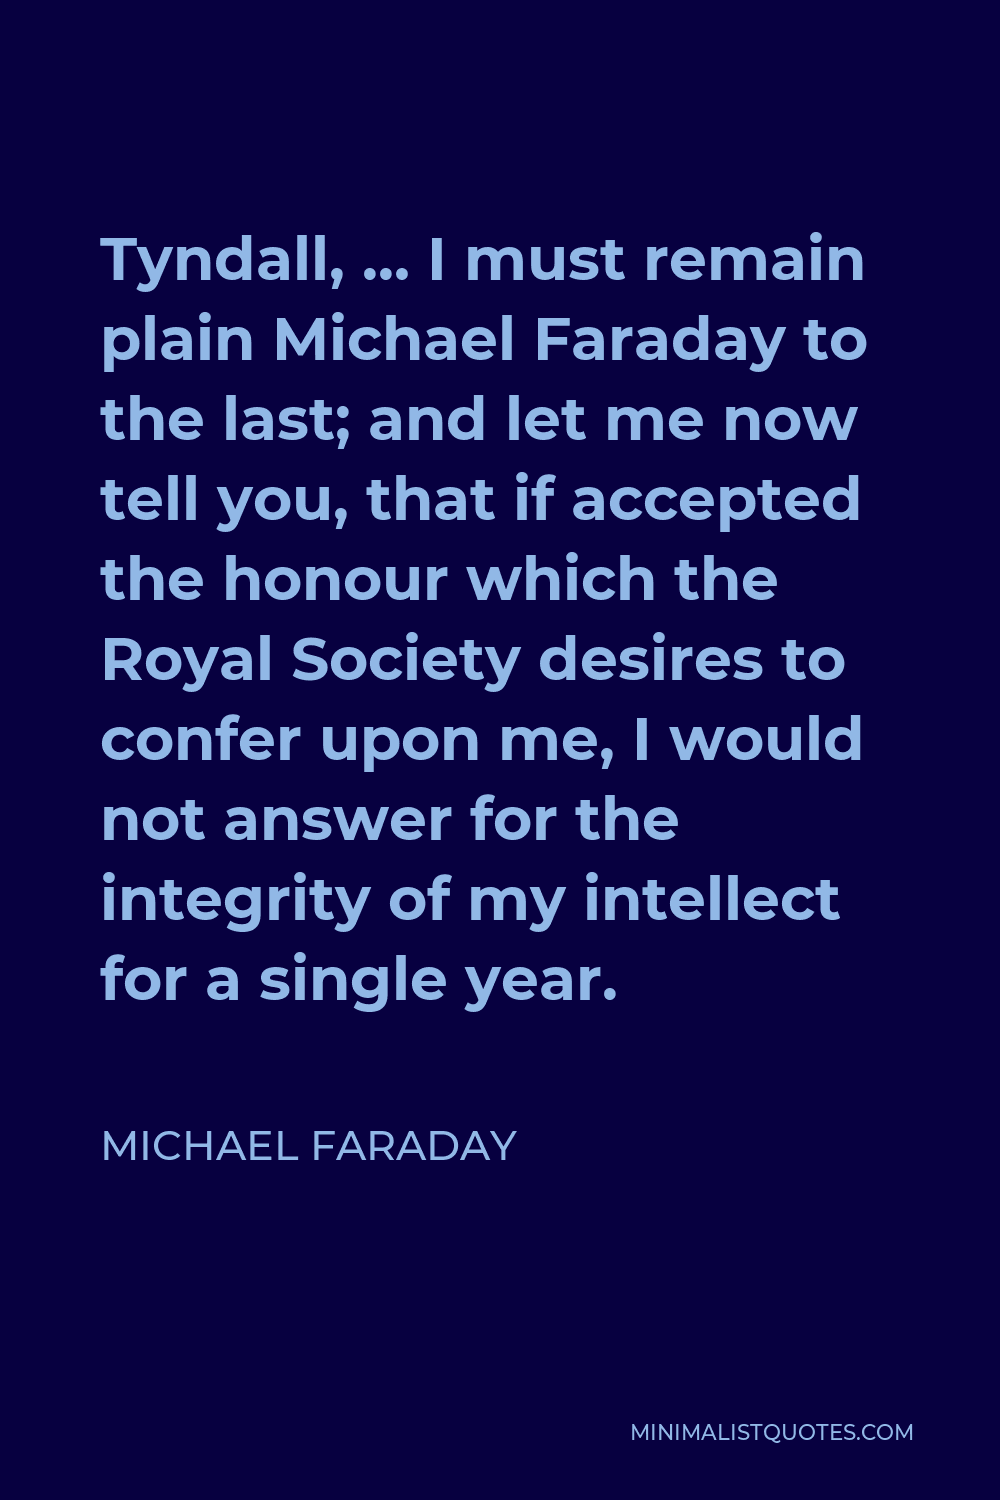 Michael Faraday Quote - Tyndall, … I must remain plain Michael Faraday to the last; and let me now tell you, that if accepted the honour which the Royal Society desires to confer upon me, I would not answer for the integrity of my intellect for a single year.